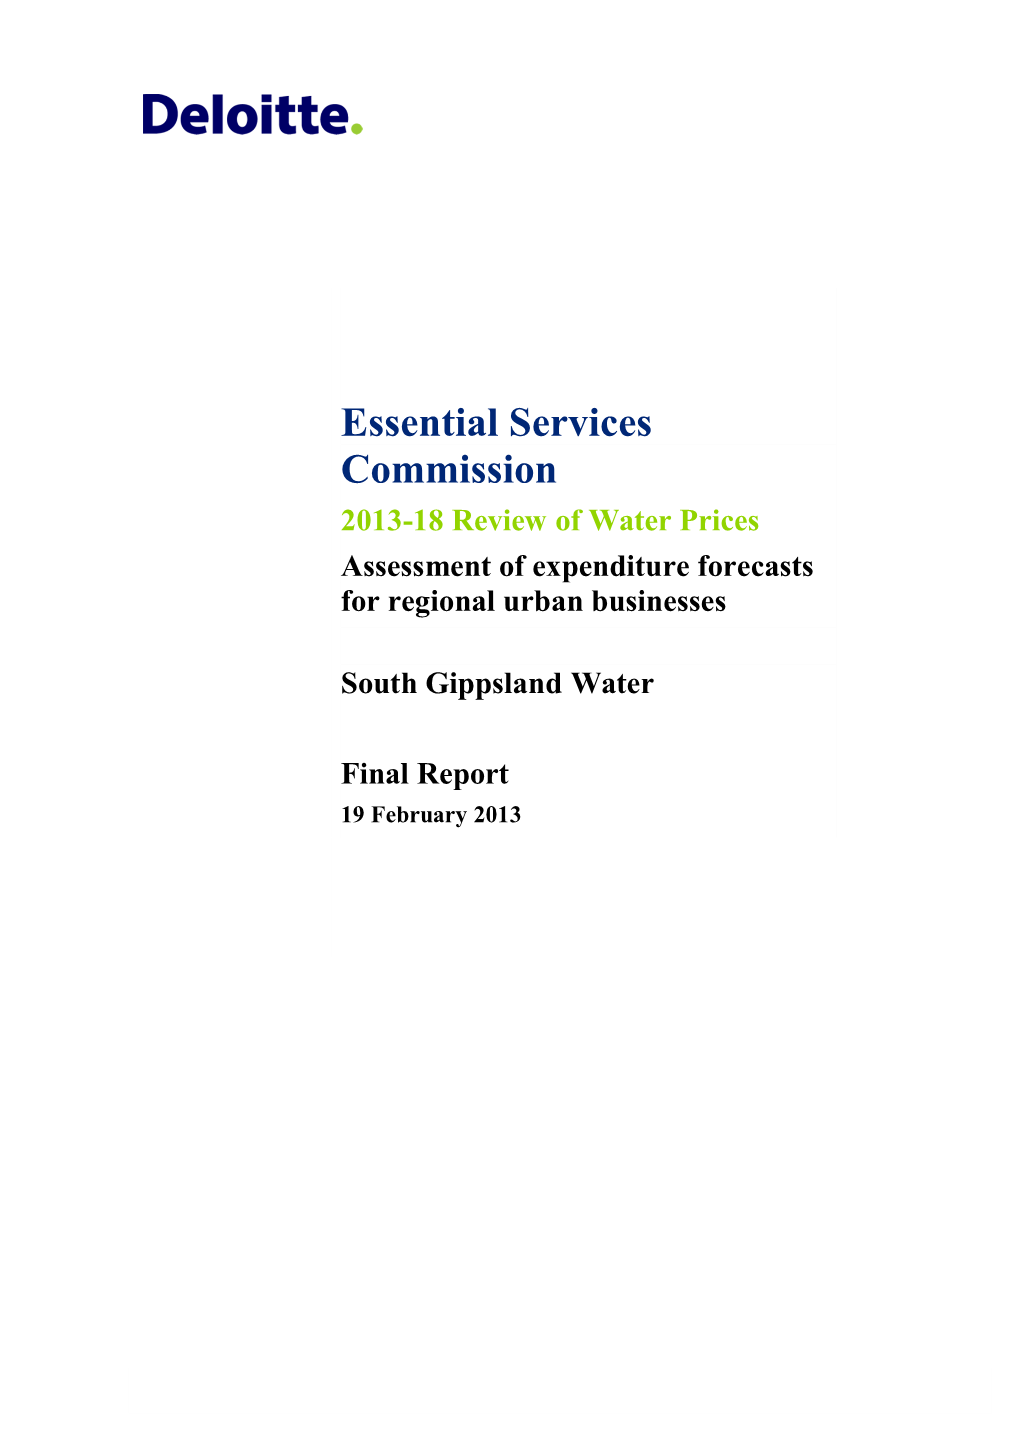 Proposal for Essential Services Commission